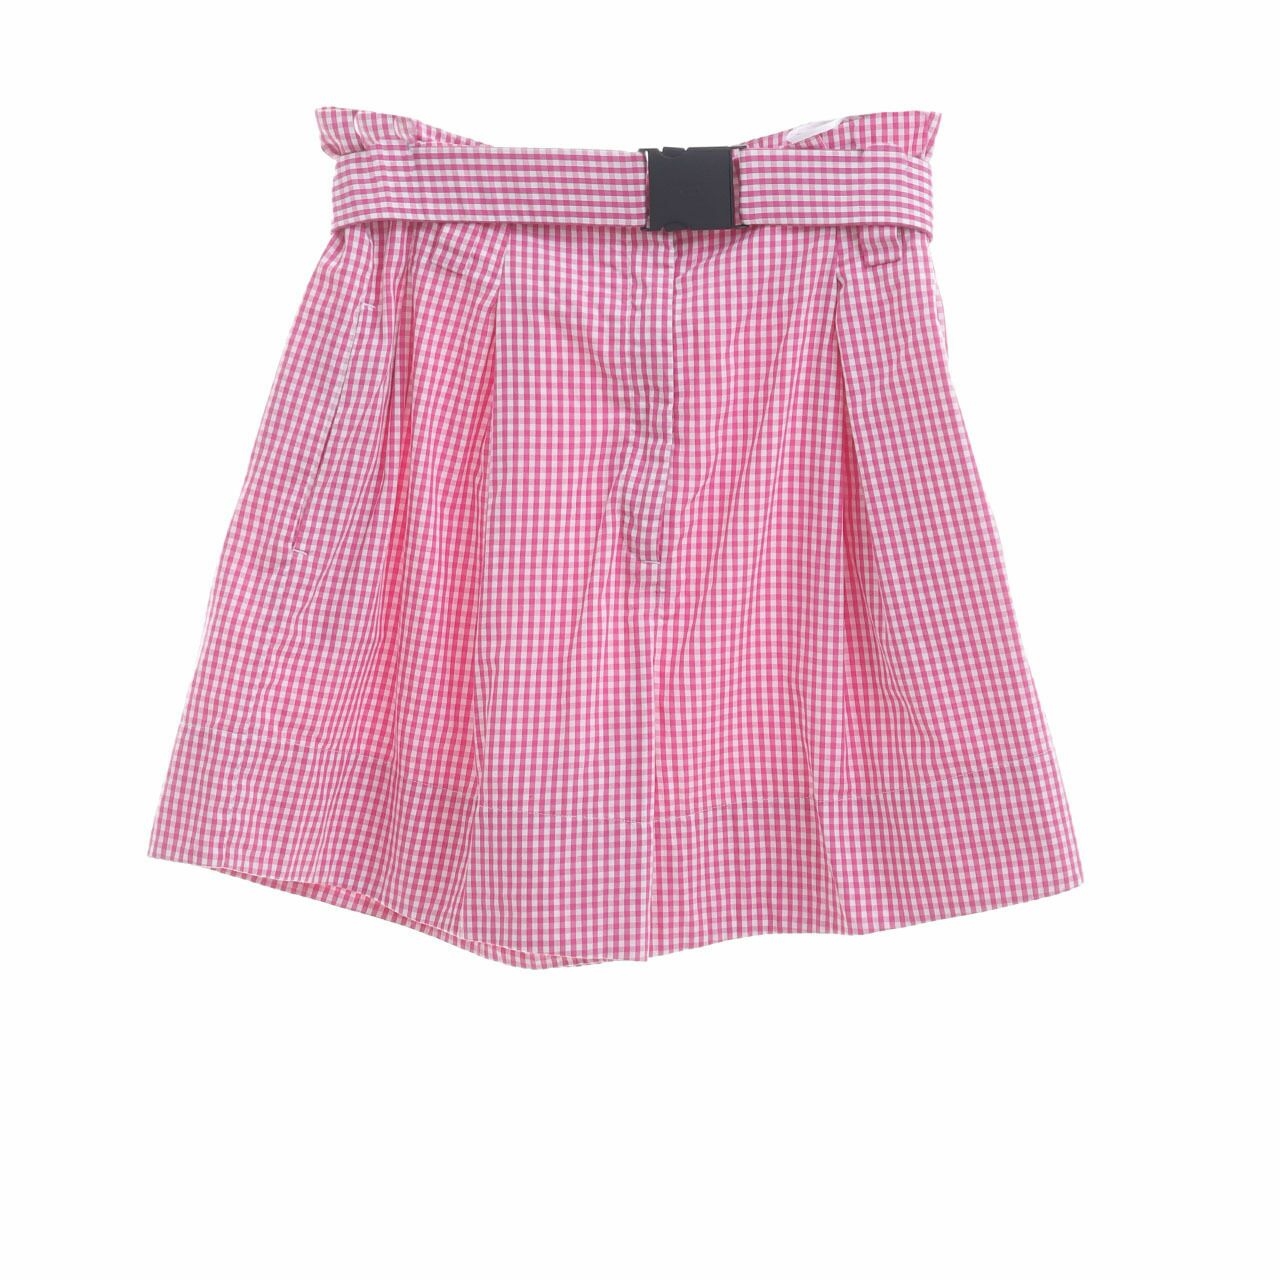 N°21 Gingham Check Pink Belted Shorts Pants